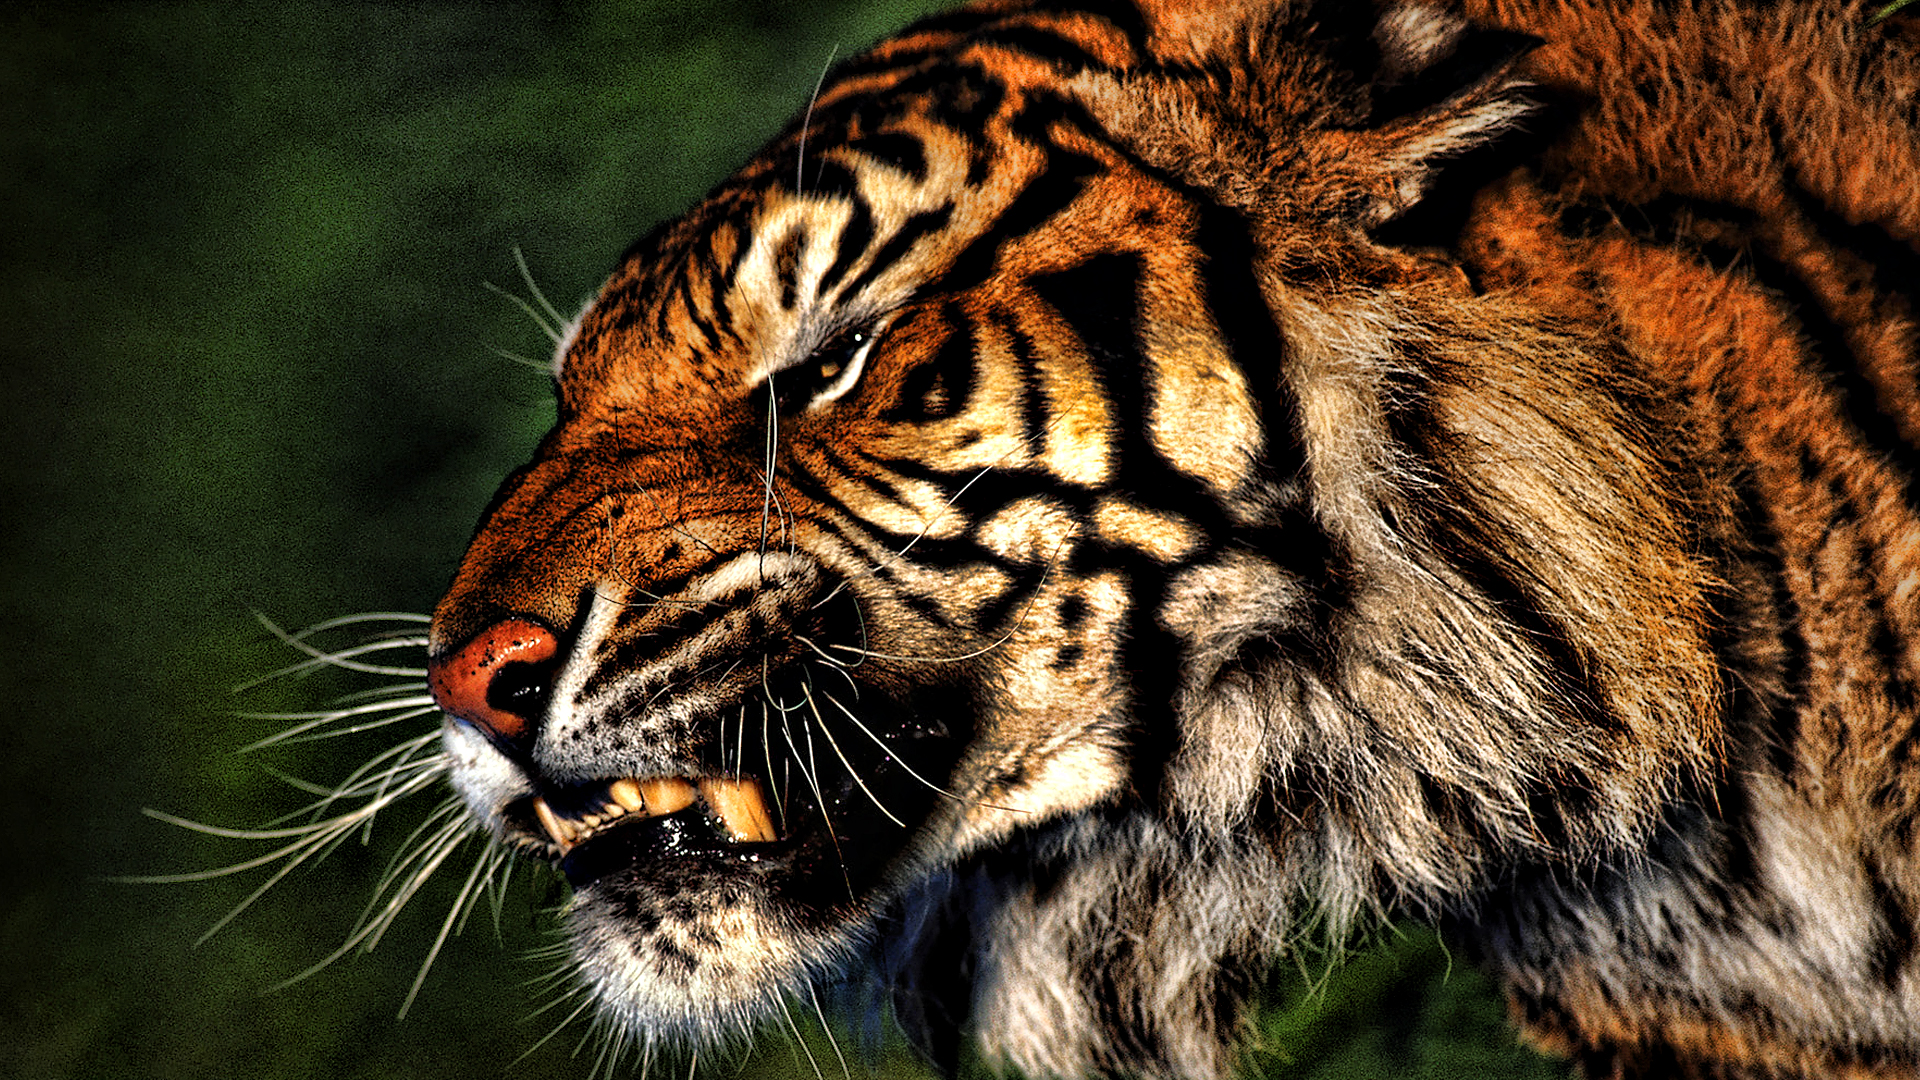 tiger free wallpaper download which is under the tiger wallpapers